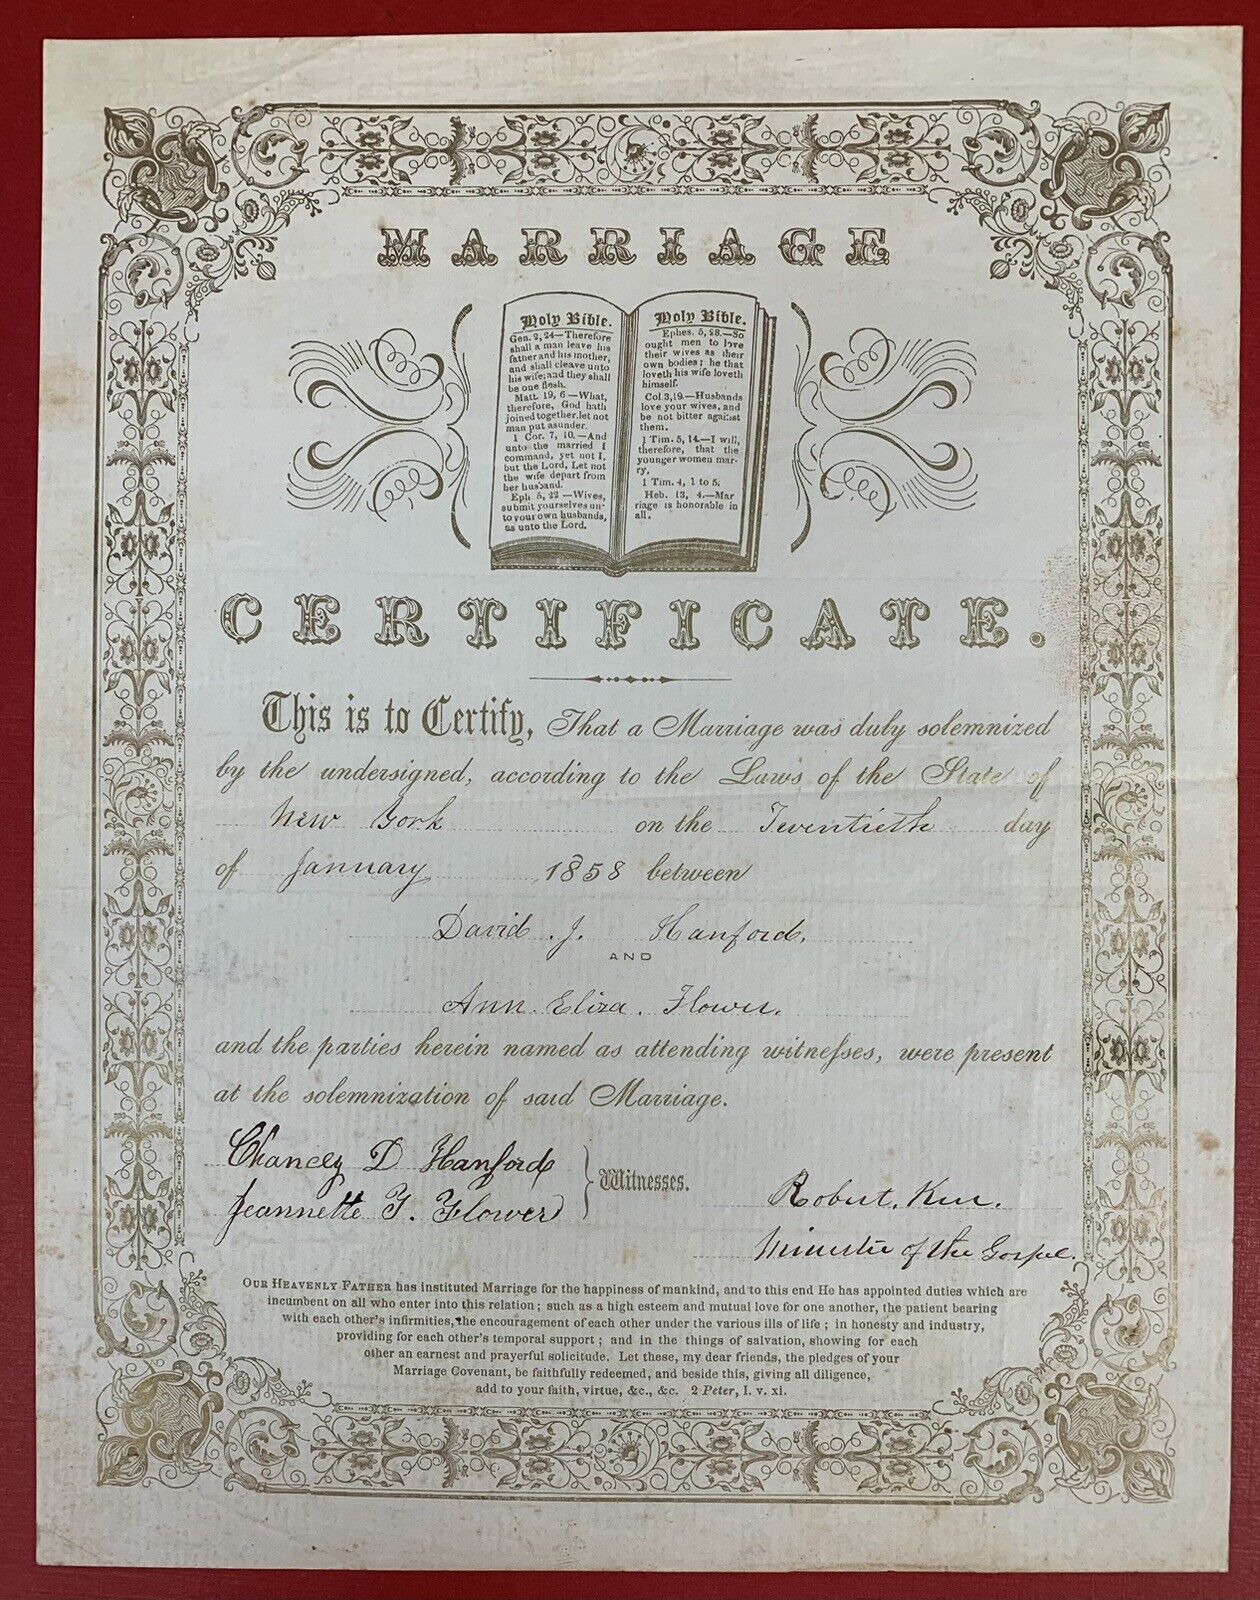 1858, New York State Christian Marriage Certificate